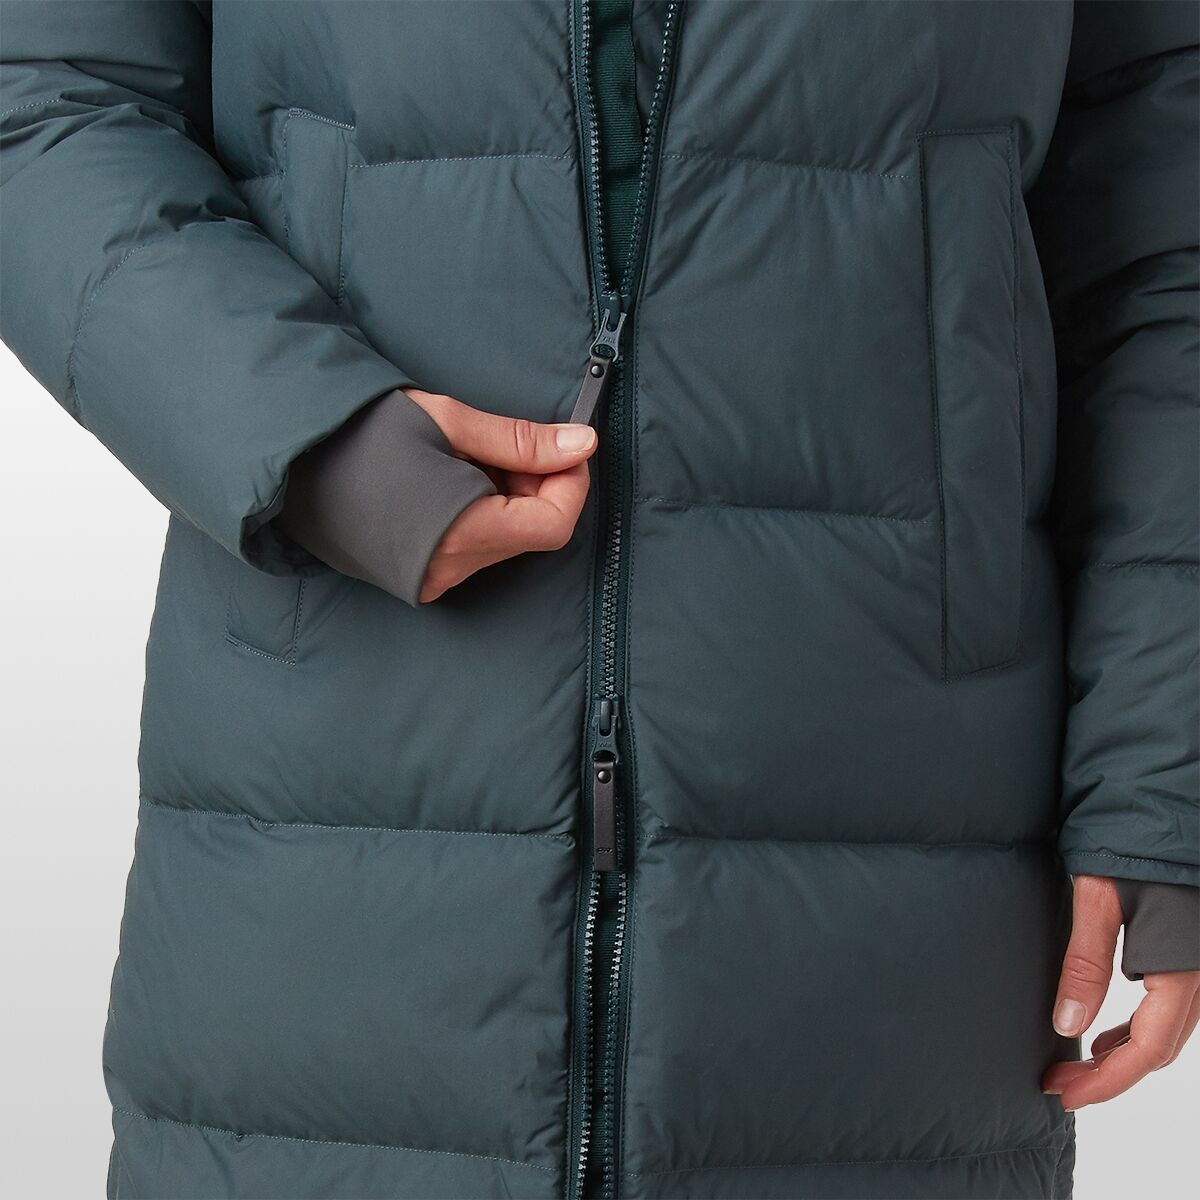 Outdoor Research Coze Down Parka - Women's - Clothing